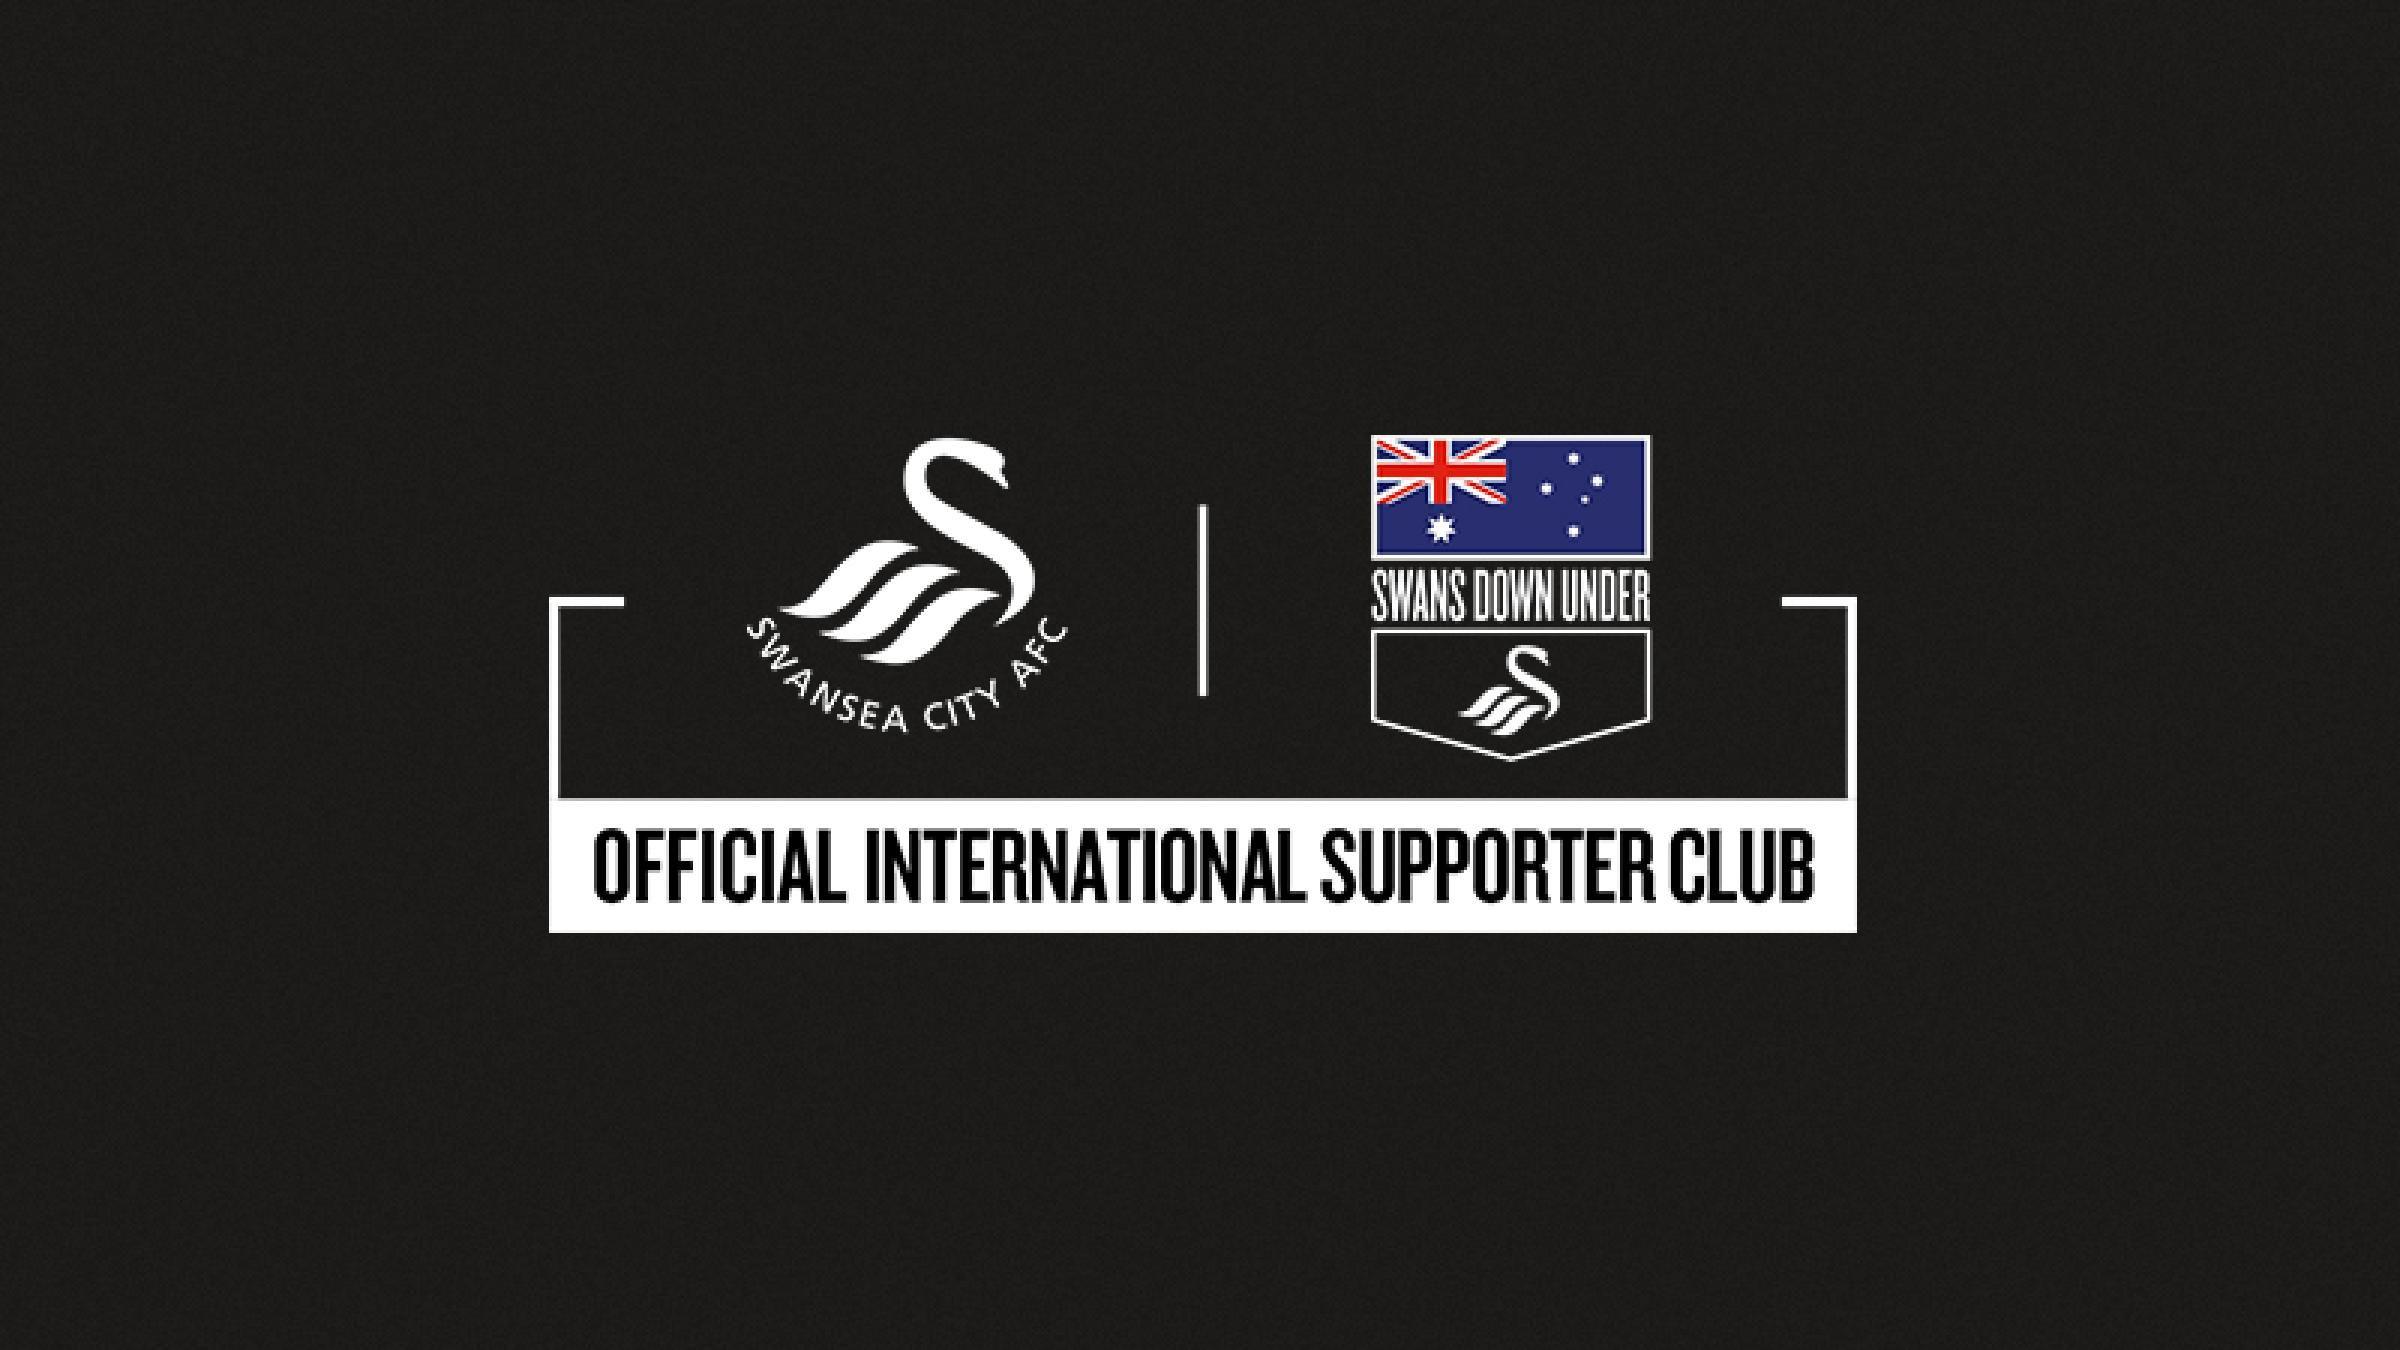 Swans with a Sun Logo - Swans Down Under | Swansea City FC